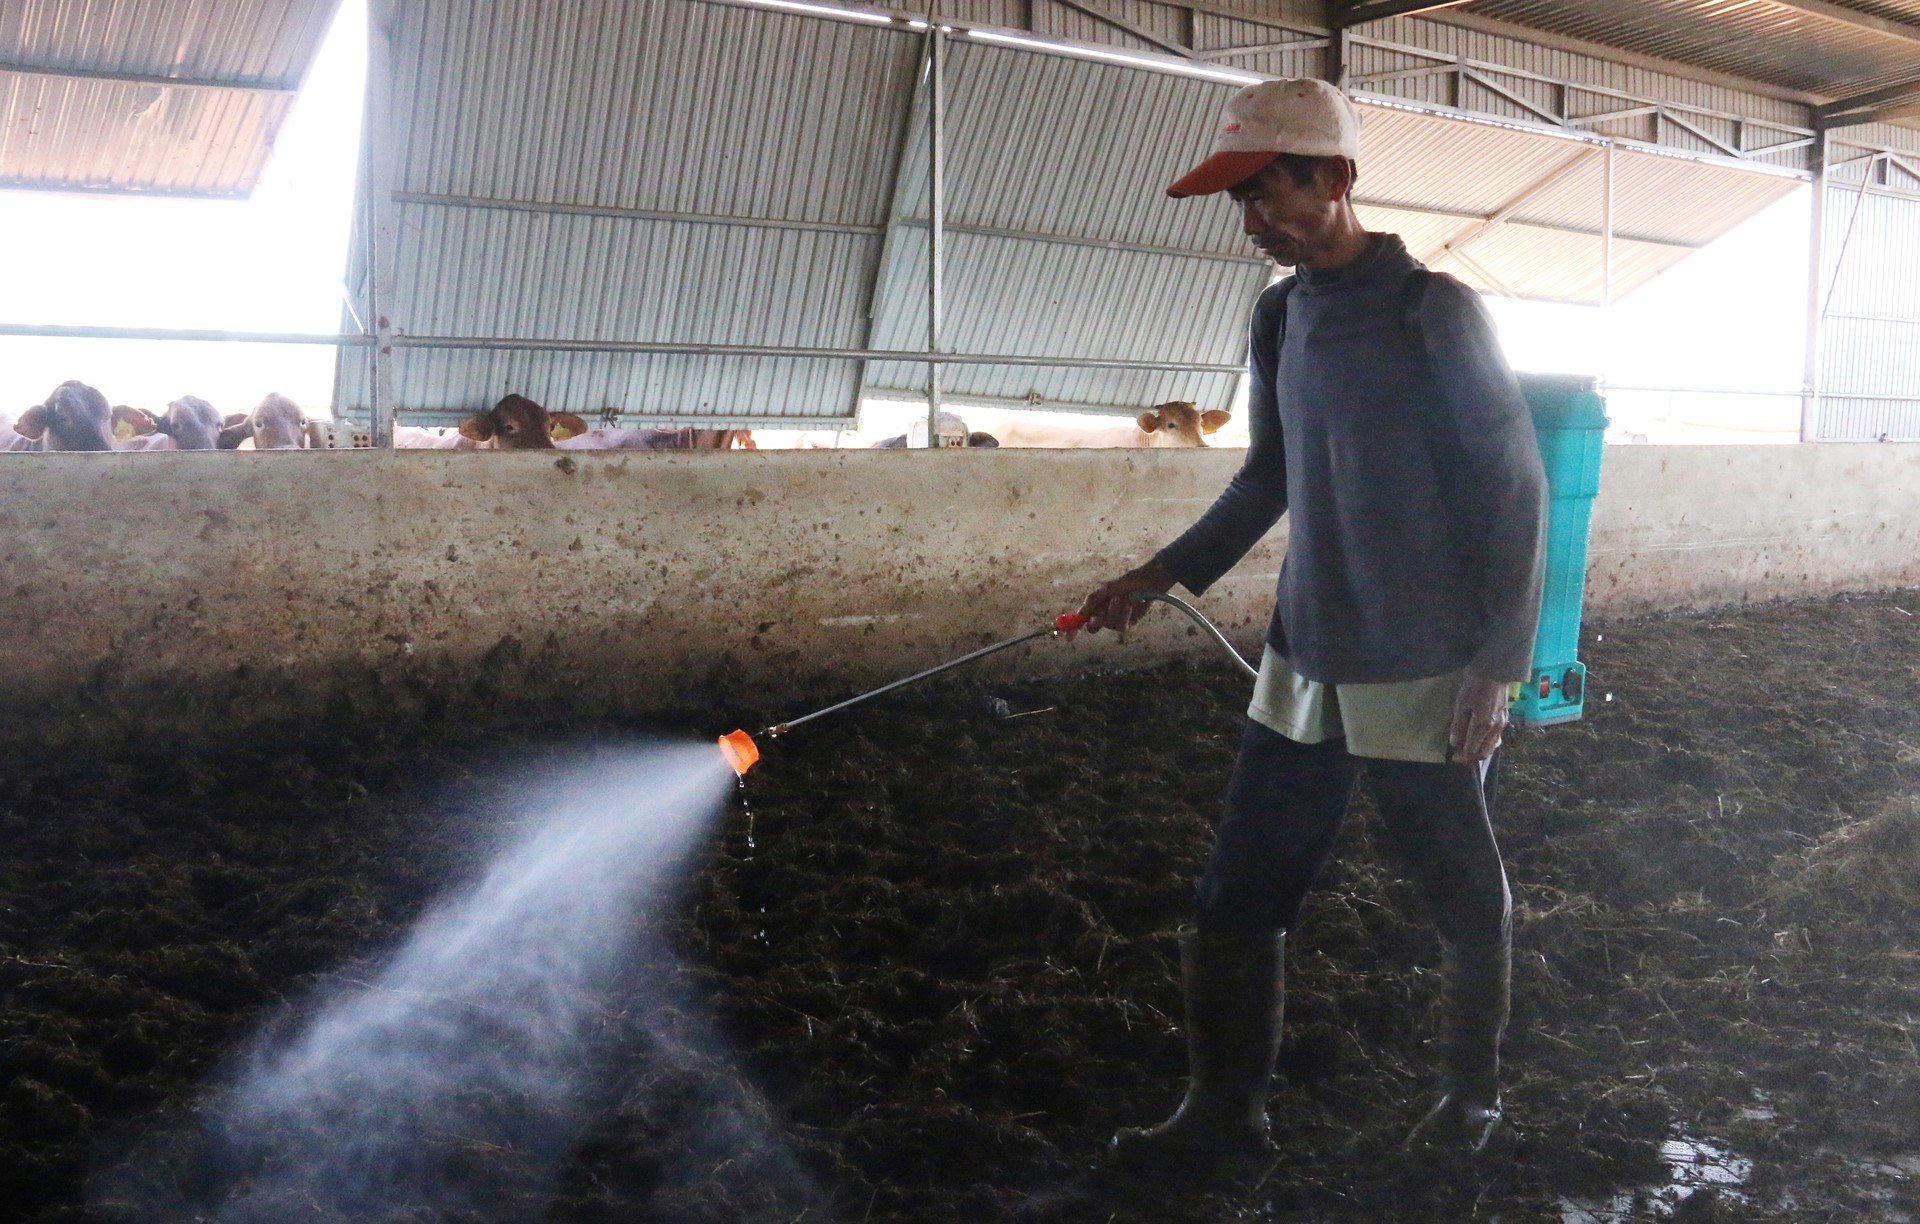 Mr. Hieu's VietGAP cow farm creates jobs for more than 10 poor local workers. Photo: Quang Yen.